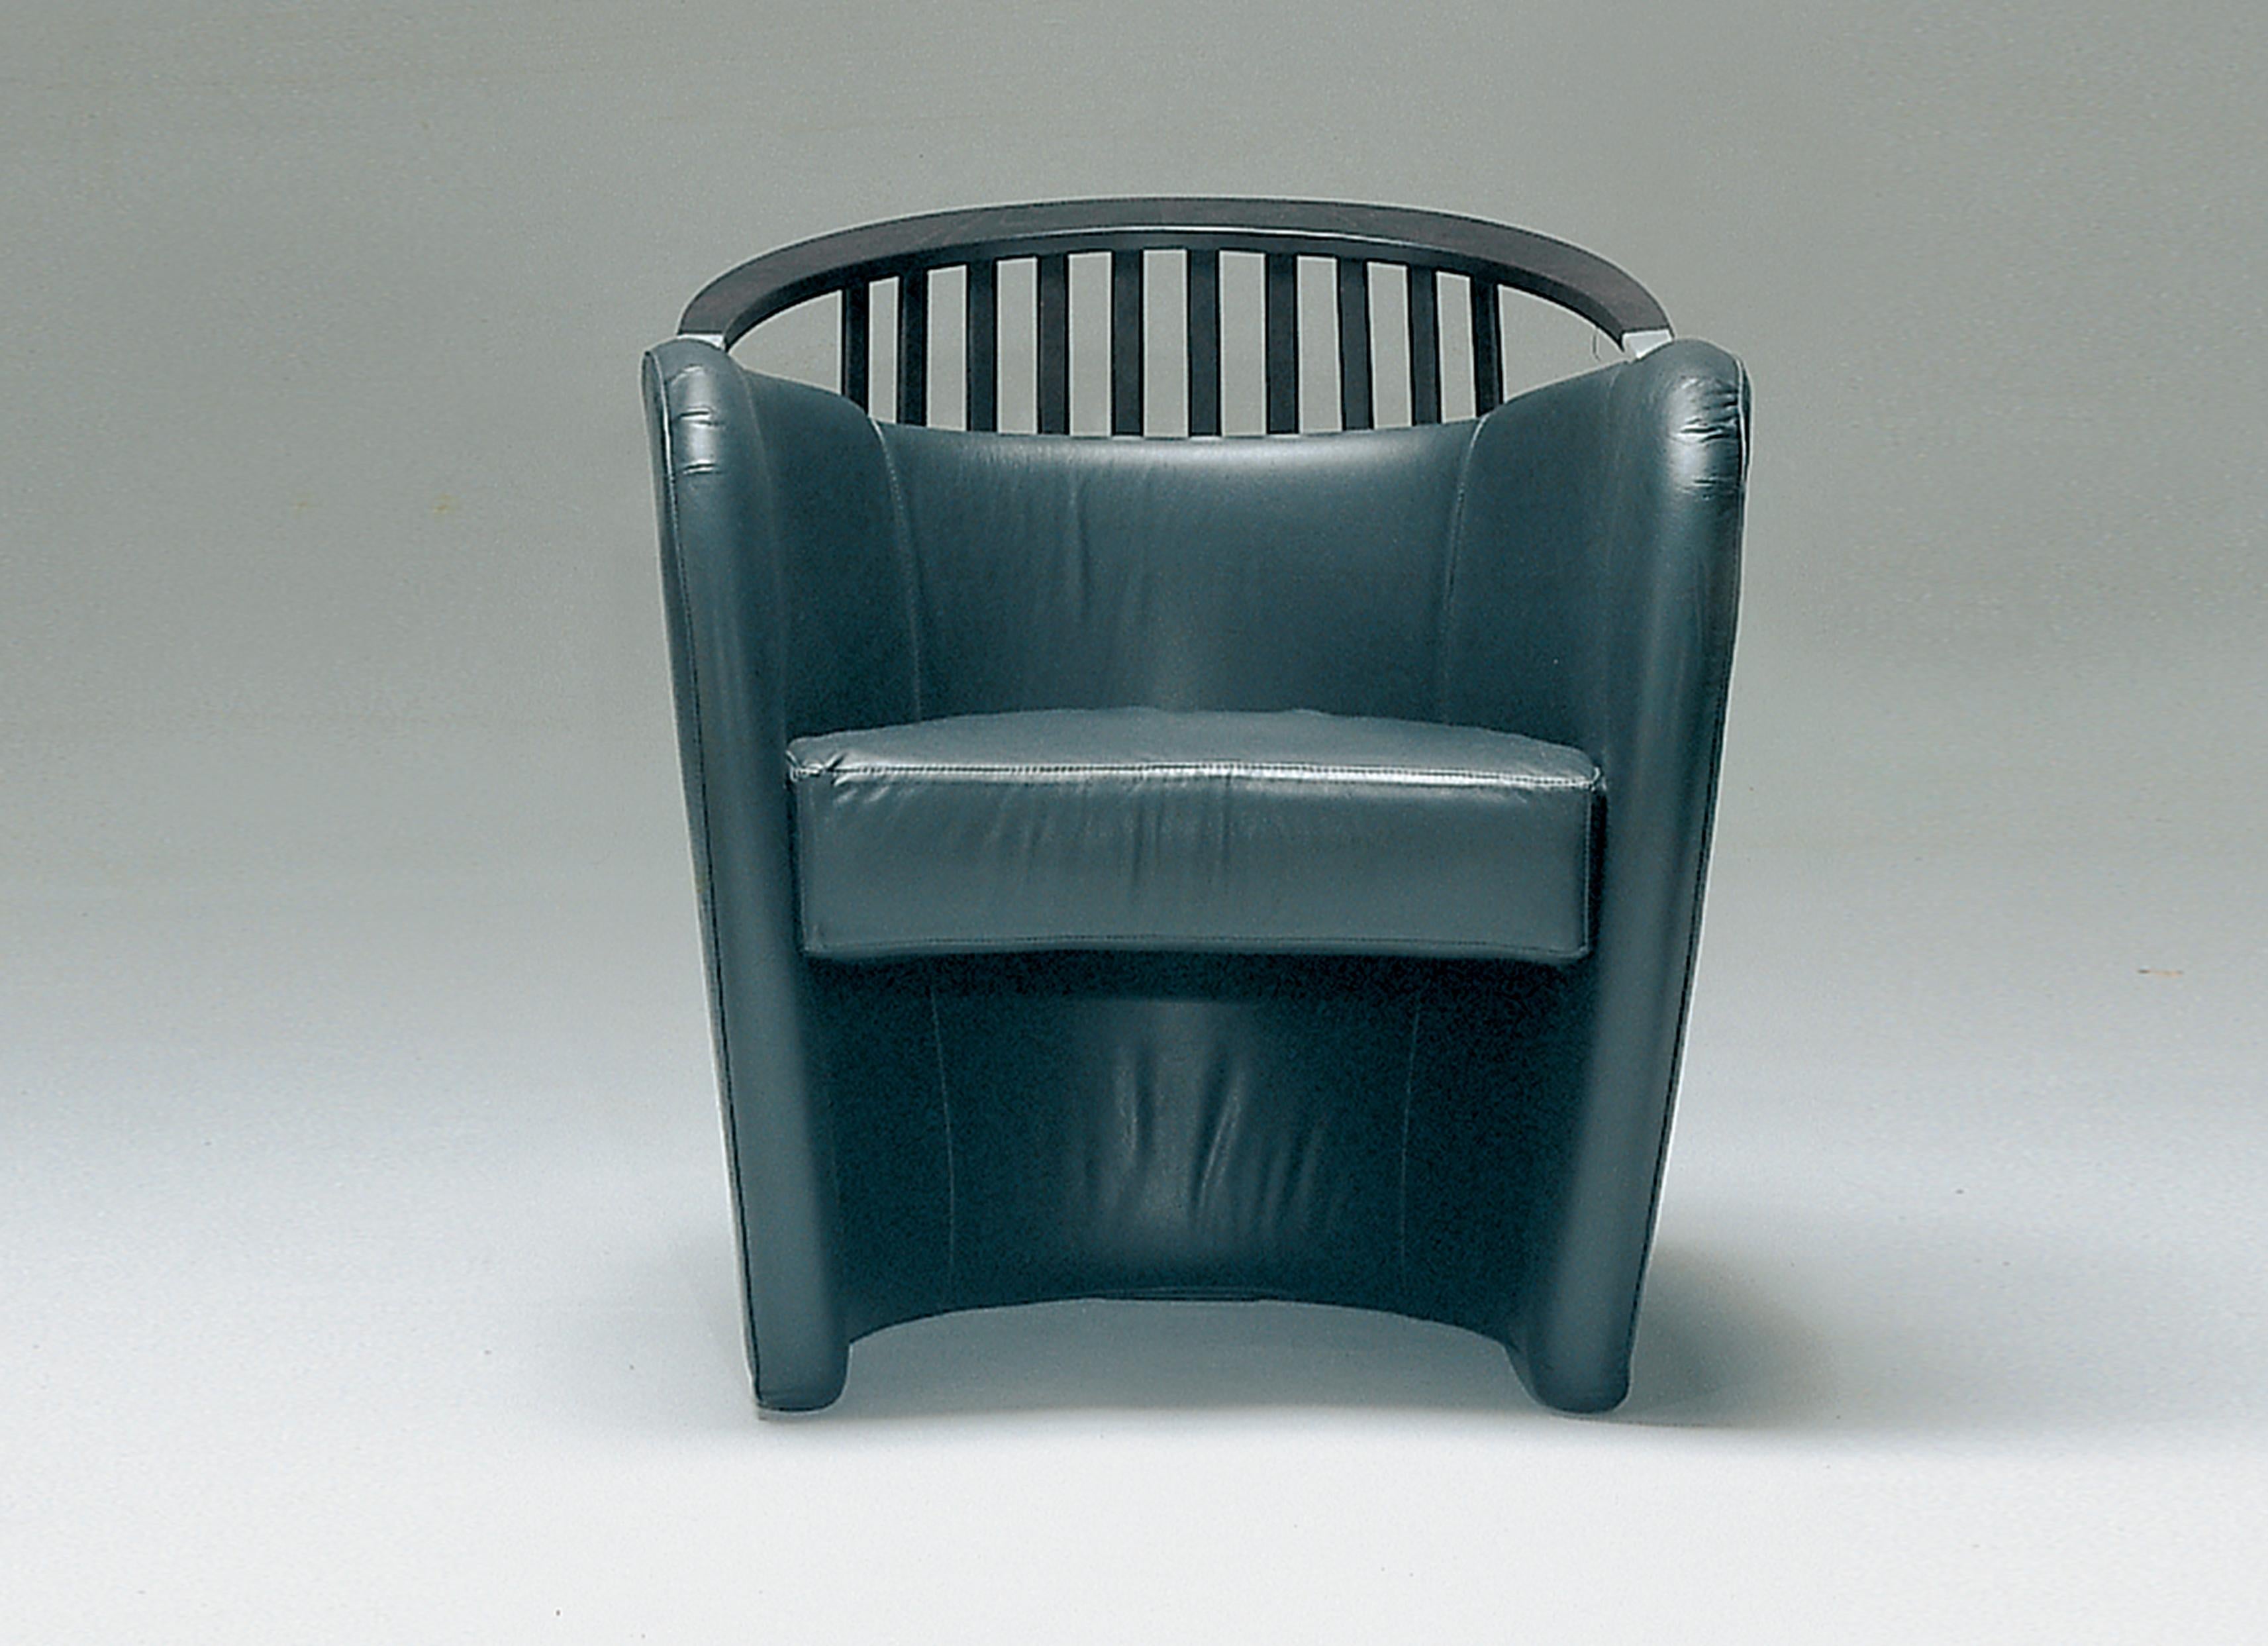 Modern Giovannetti, Armchair with Wooden Backrest from the 90s by M. Matteini, Nausicaa For Sale